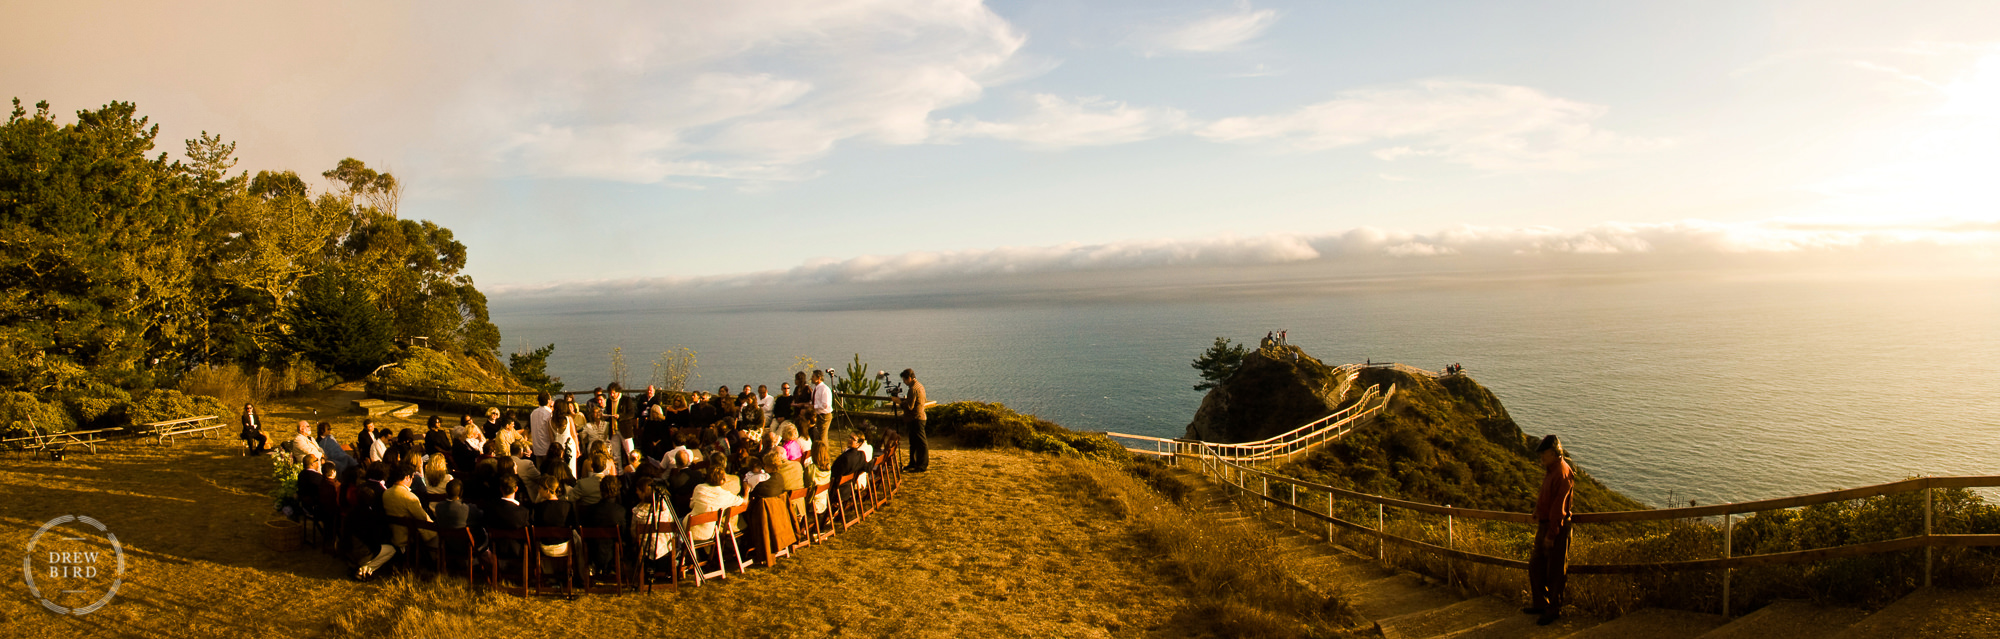 Muir Beach Overlook wedding ceremony at sunset on a cliff edge overlooking pacific ocean.